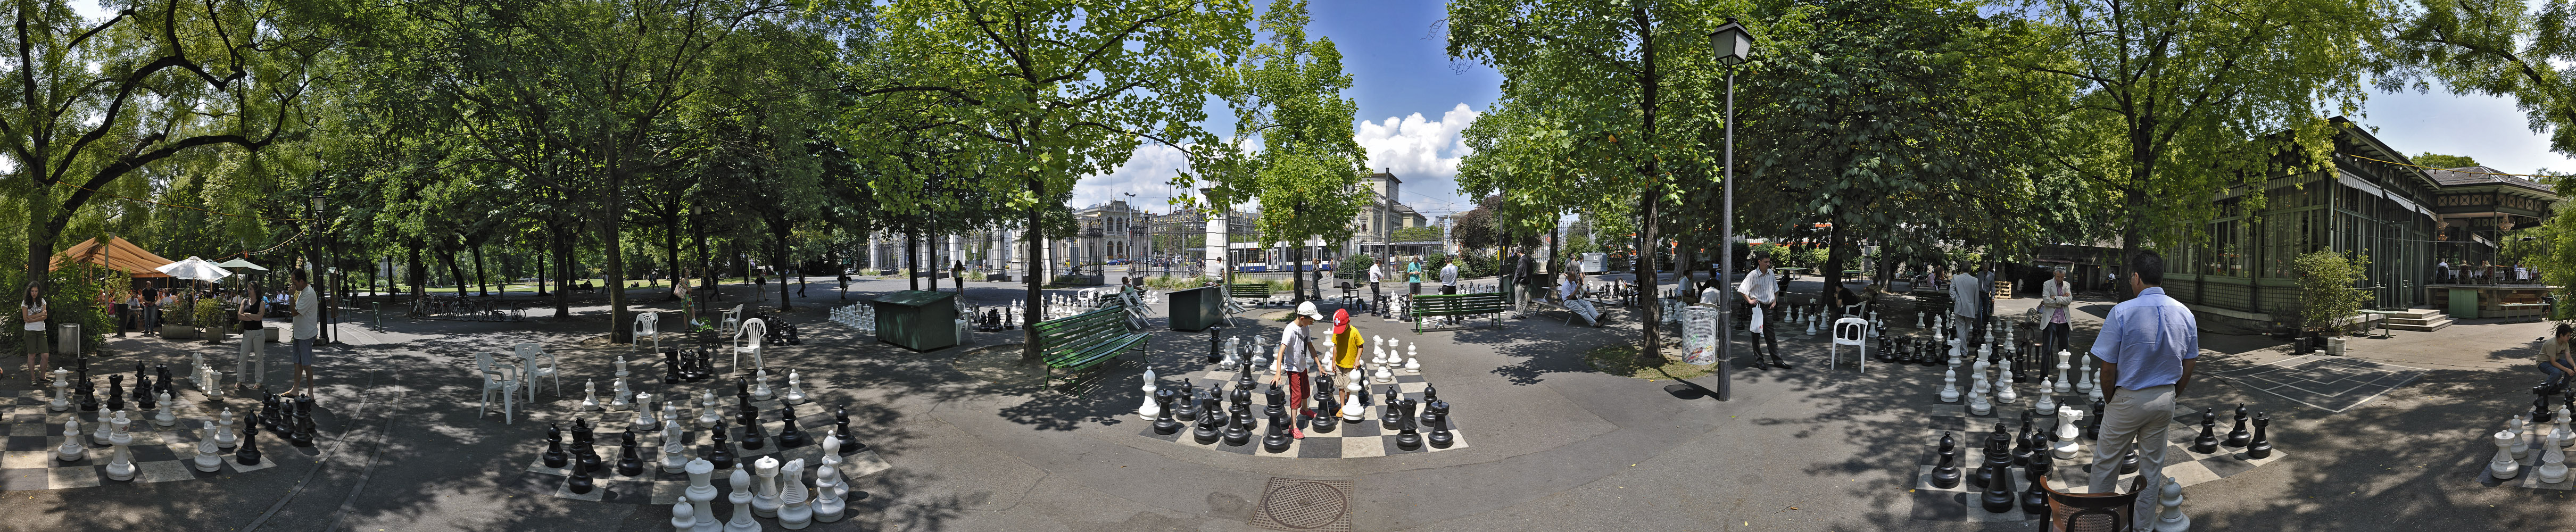 Chess-Players at the Parc des Bastions